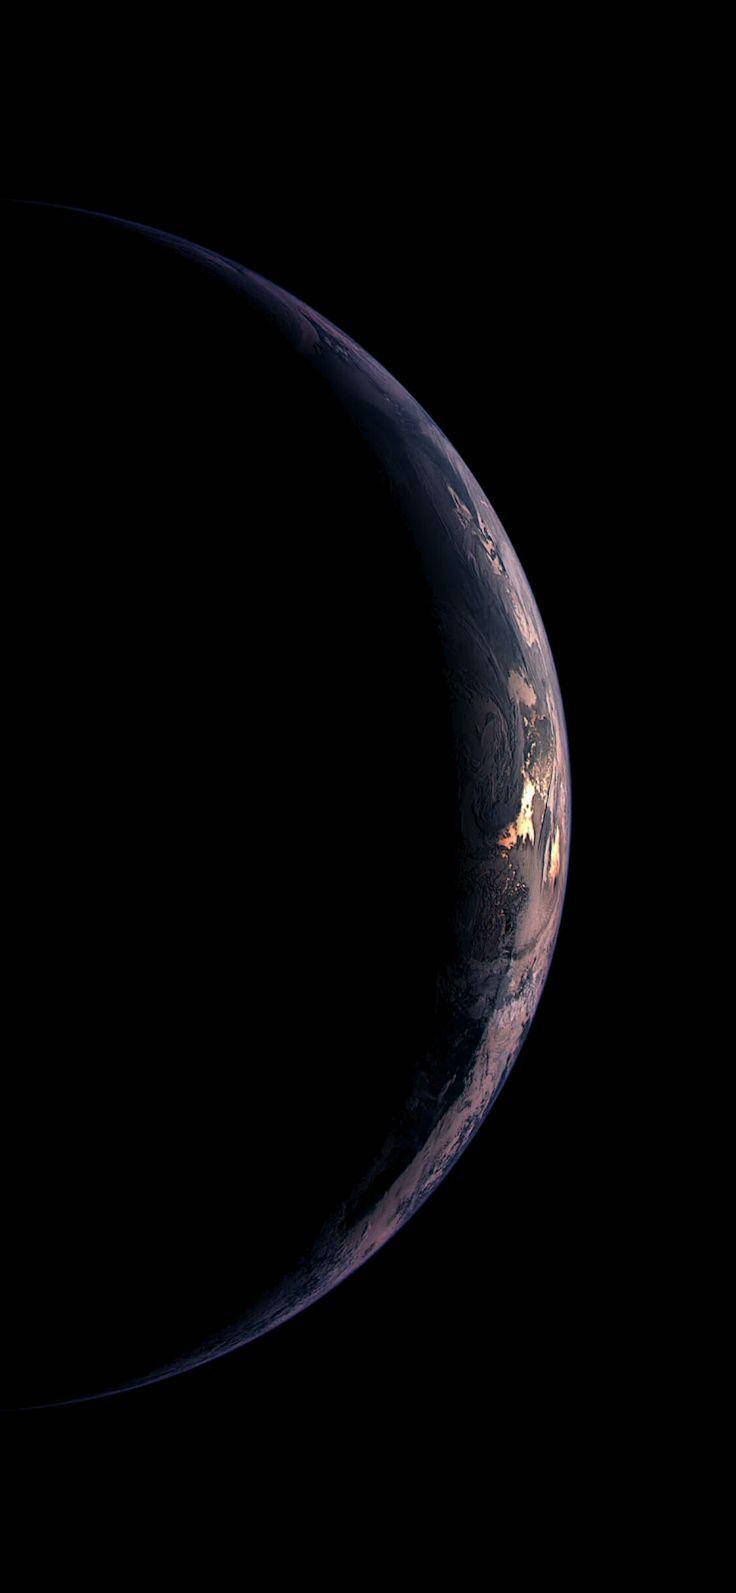 Planet Surface Iphone X Amoled Wallpaper